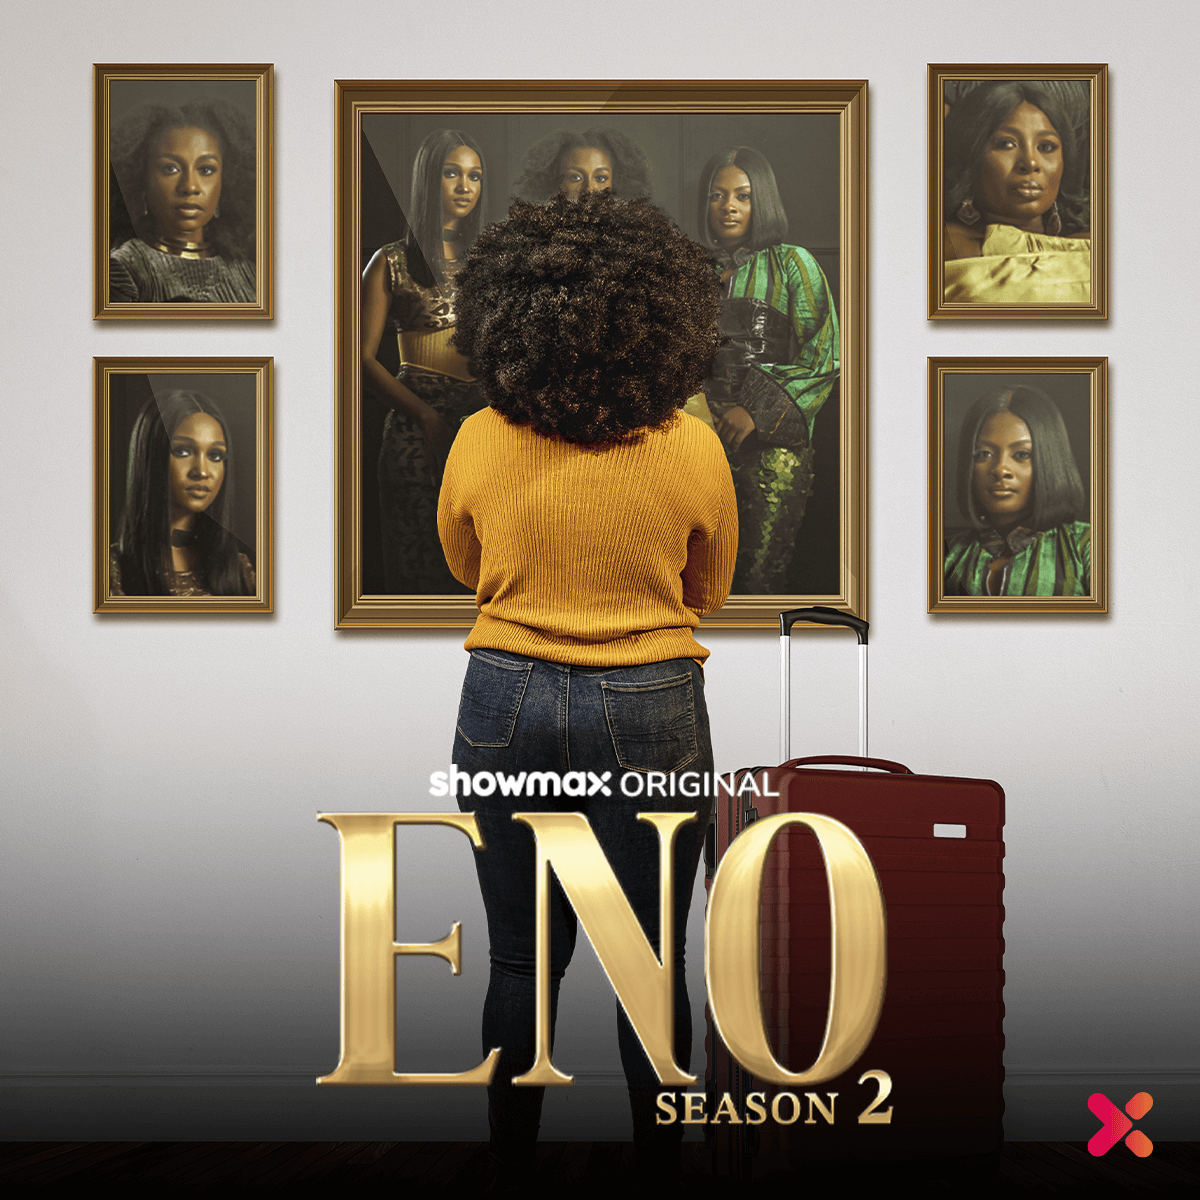 Shirley Frimpong-Manso’s hit drama ENO returns for S2 in February